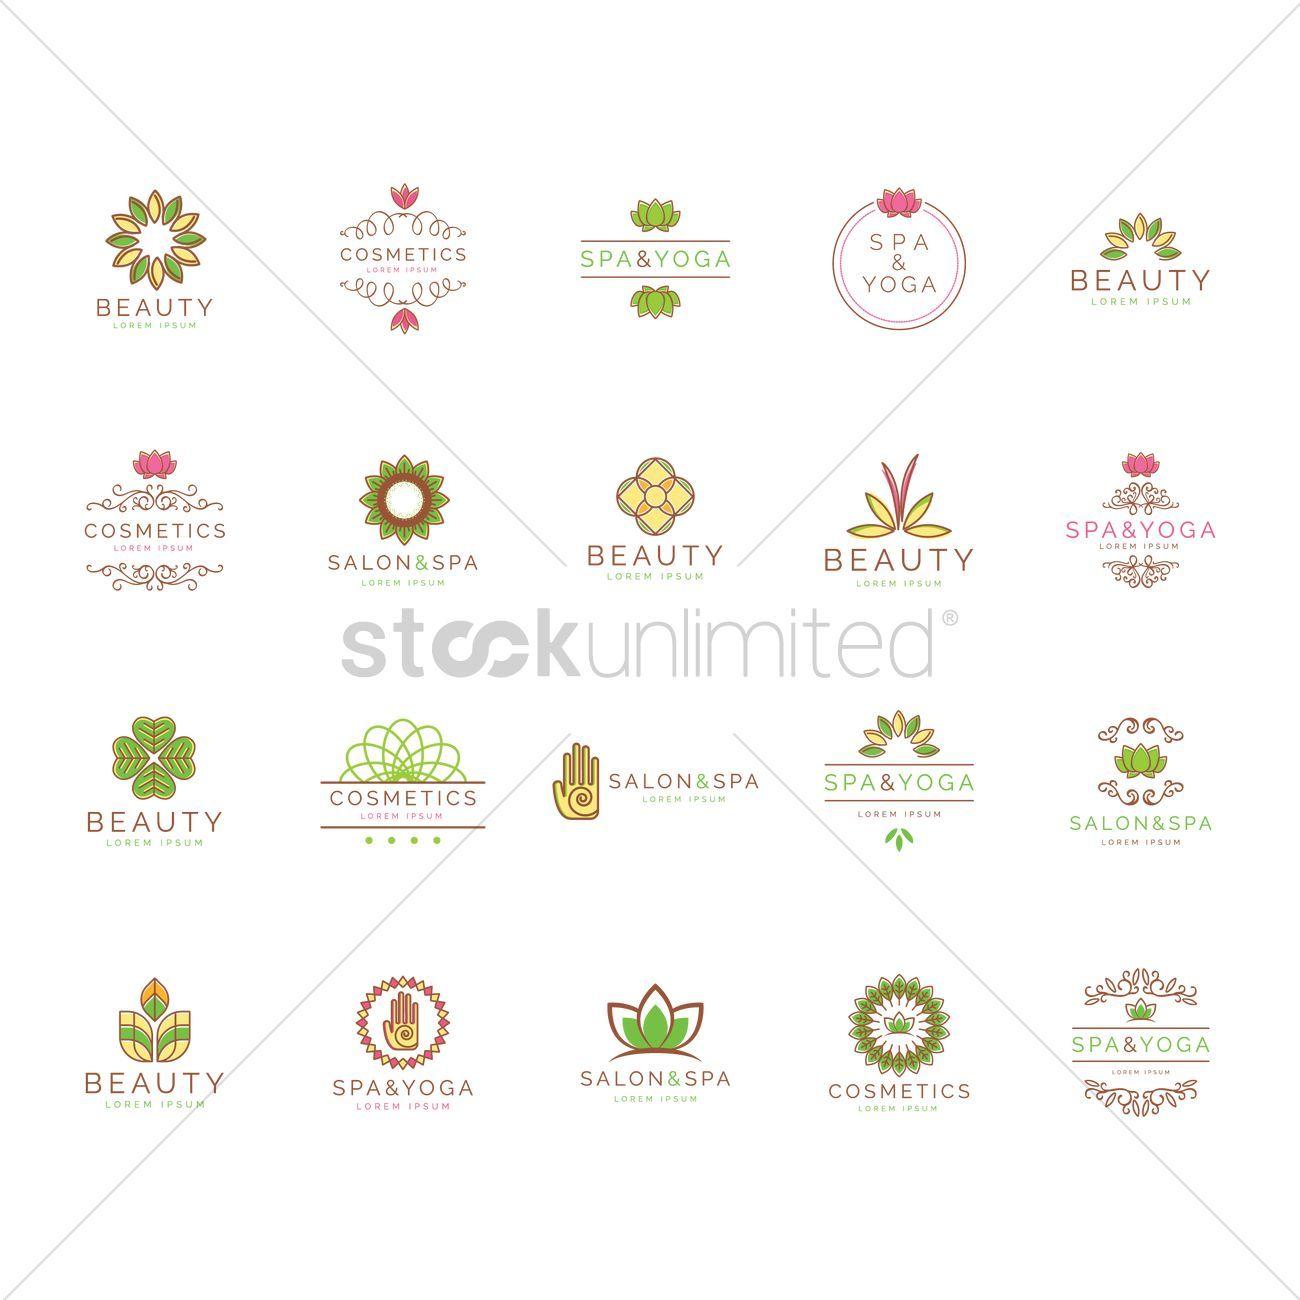 Spa Logo - Beauty and spa logo element set Vector Image - 1825439 | StockUnlimited